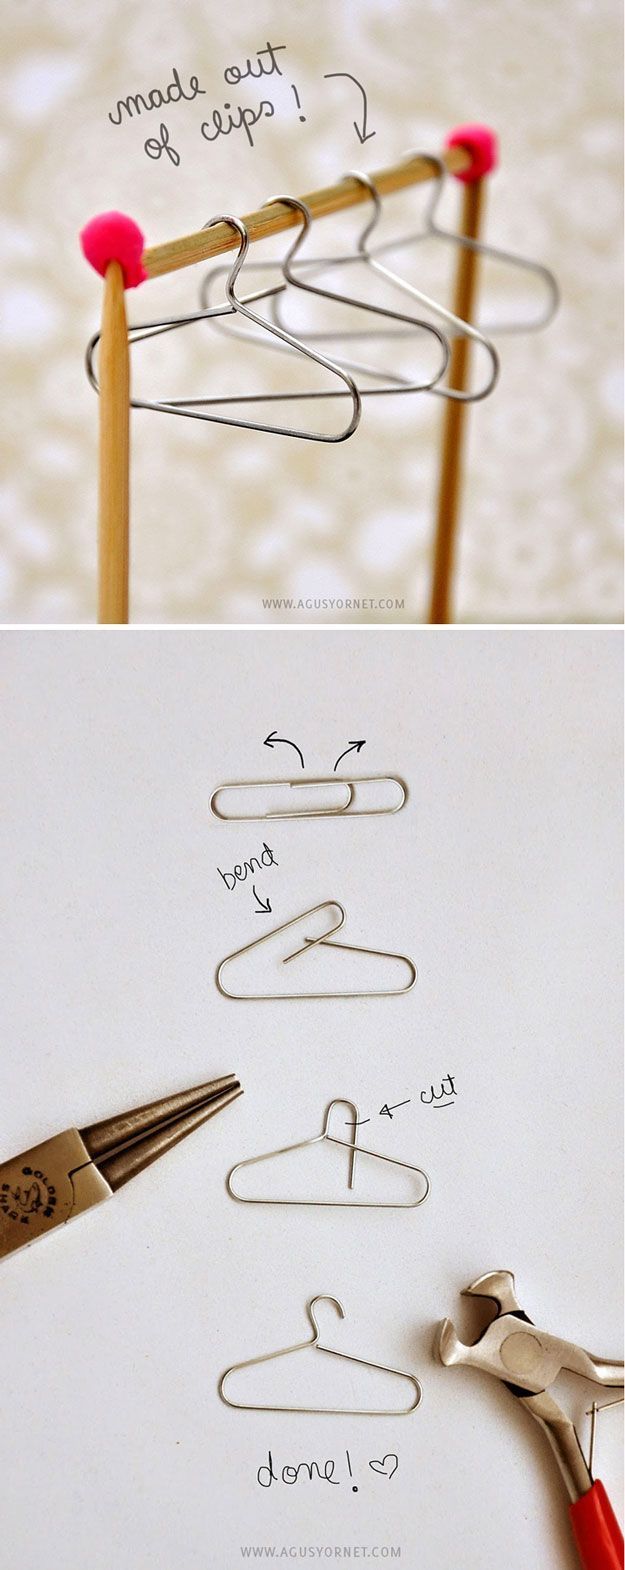 Cool Mini Homemade Crafts and Scrapbook Ideas | DIY Mini Hangers by DIY Ready at d